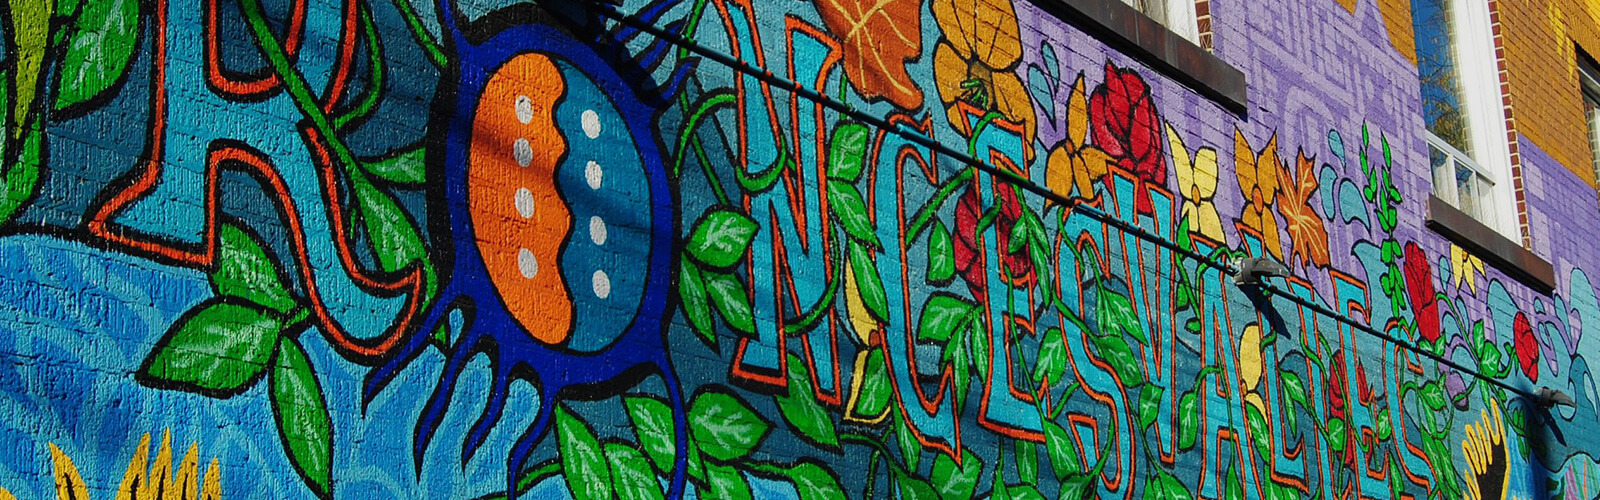 A bright and colourful mural painted on the side of a building with a few windows at the top. The mural features flowers and other greenery and the name "Roncesvalles" painted in large lettering. Painted vines run through the lettering.